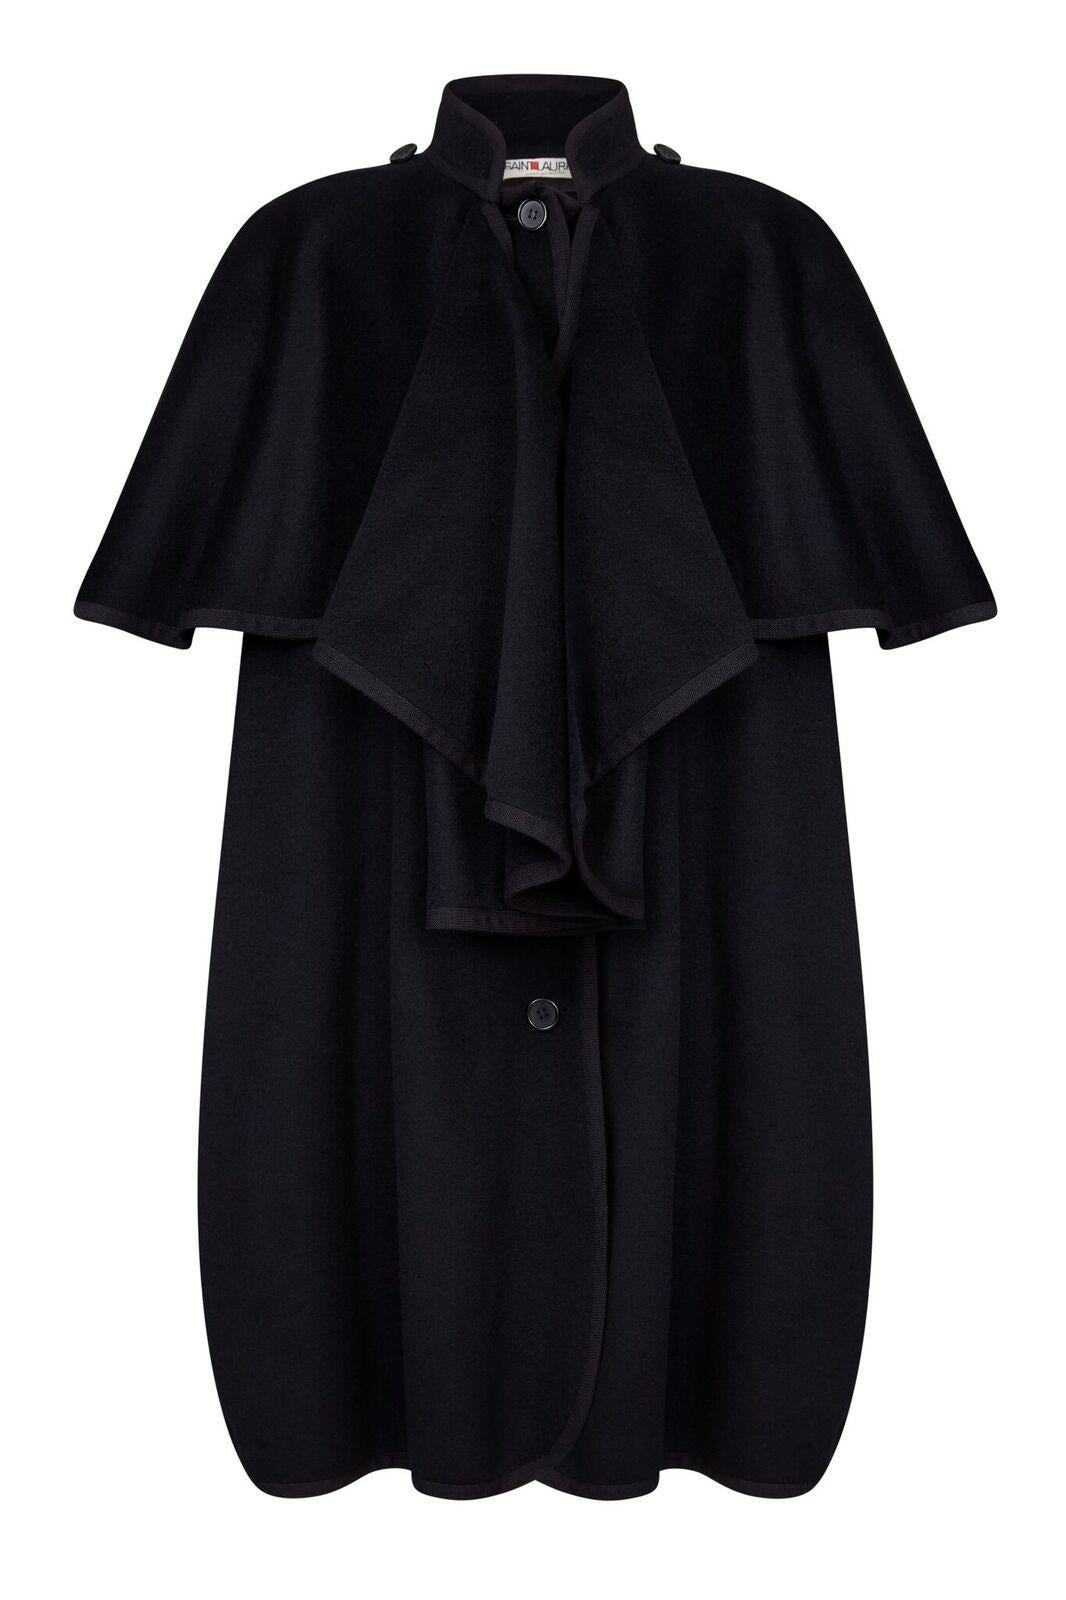 This magnificent 1970s Yves Saint Laurent black wool cape excites drama and style and can be worn two ways, varying the impact of the piece. The soft wool felt is cut almost exclusively from one length and artfully fashioned to create a double tier